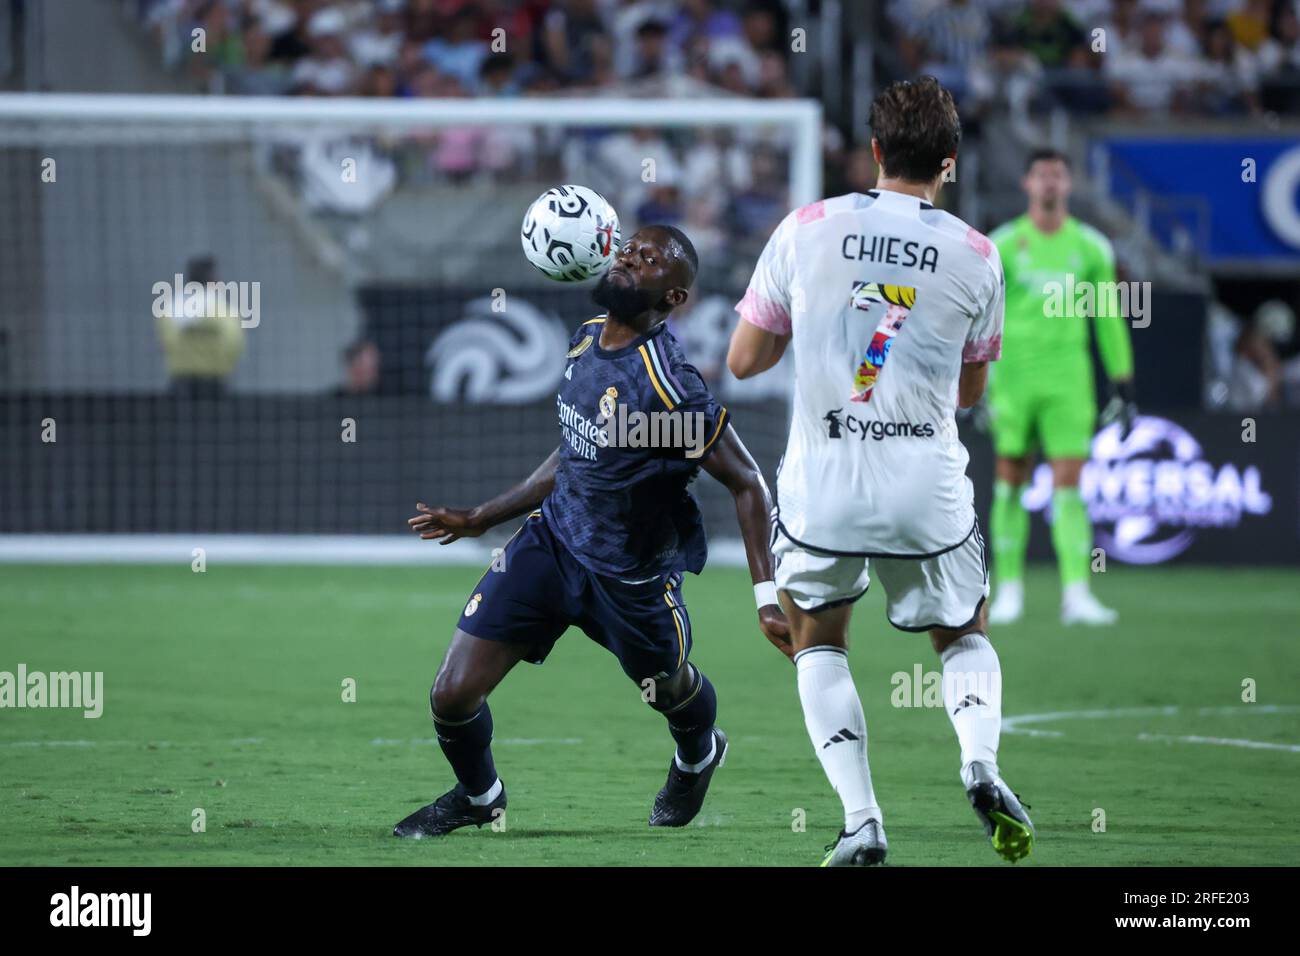 United States this Wednesday, August 2nd. Chiesa of Juventus and Antonio Rüdiger of Real Madrid, International friendly match at Camping World Stadium in the city of Orlando in the United States this Wednesday, August 2nd. Credit: Brazil Photo Press/Alamy Live News Stock Photo